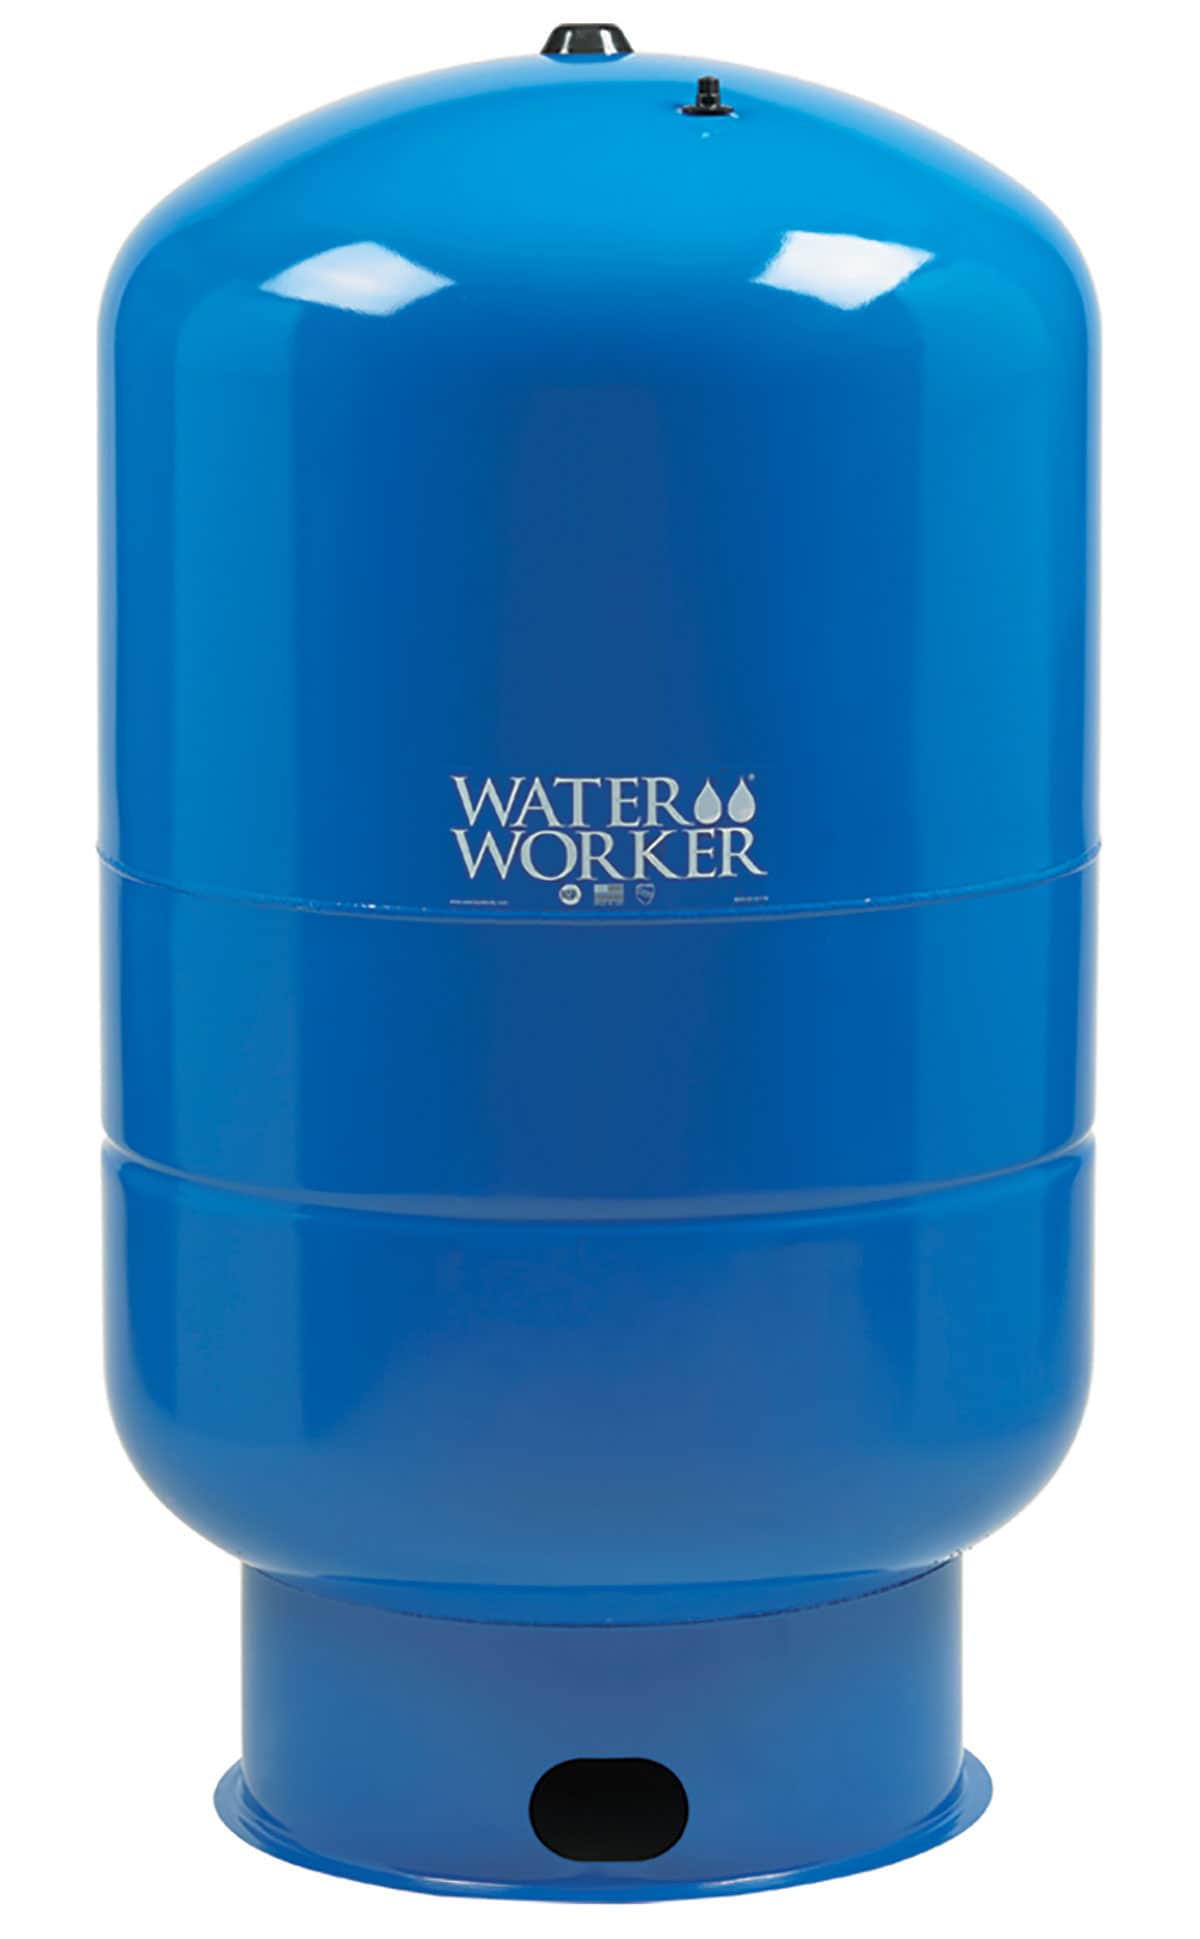 4 Gal Pressurized Well Steel Tank Durable Thick Water Storage Container 